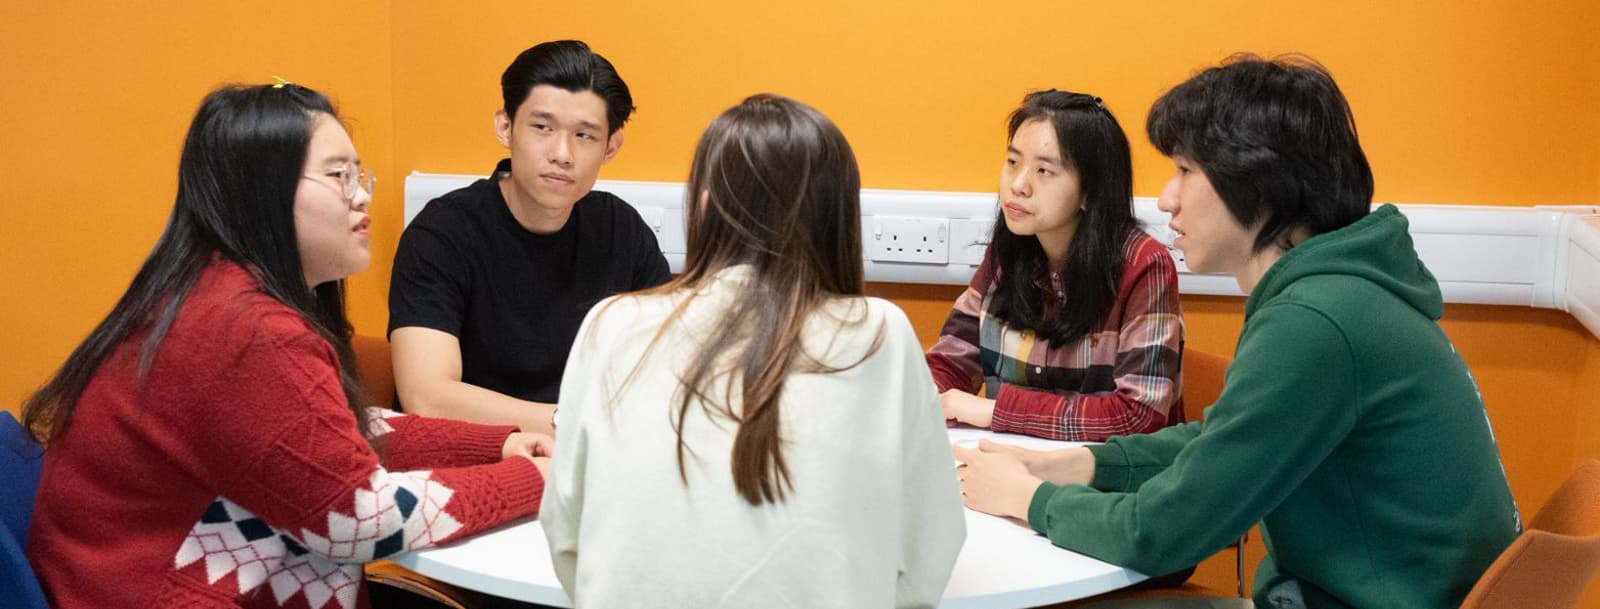 a group of students having a discussion